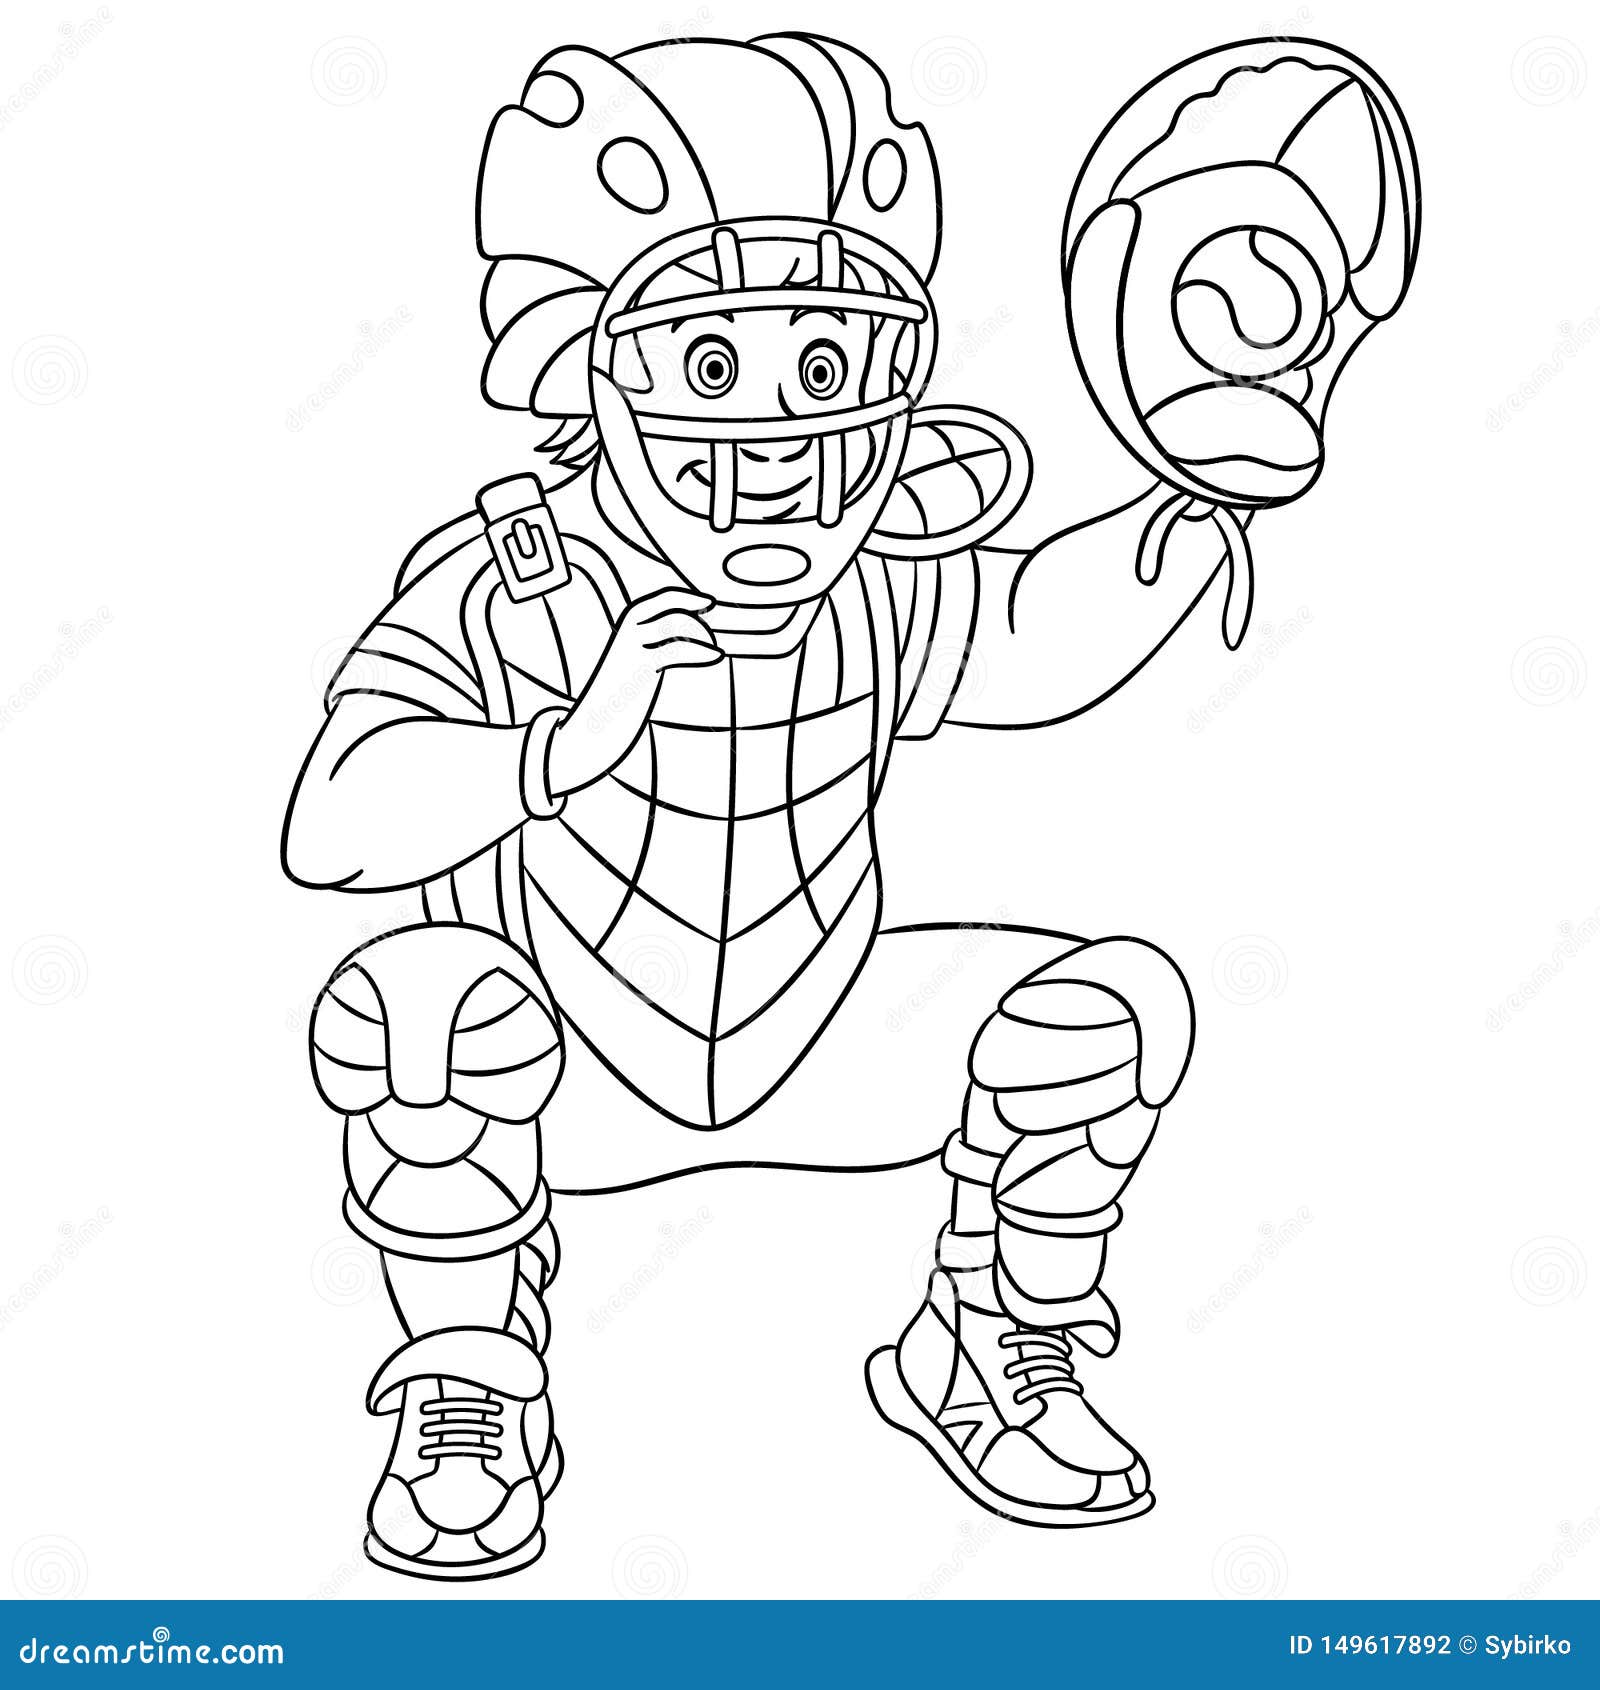 Softball Coloring Page Colored Illustration Cartoon Vector ...